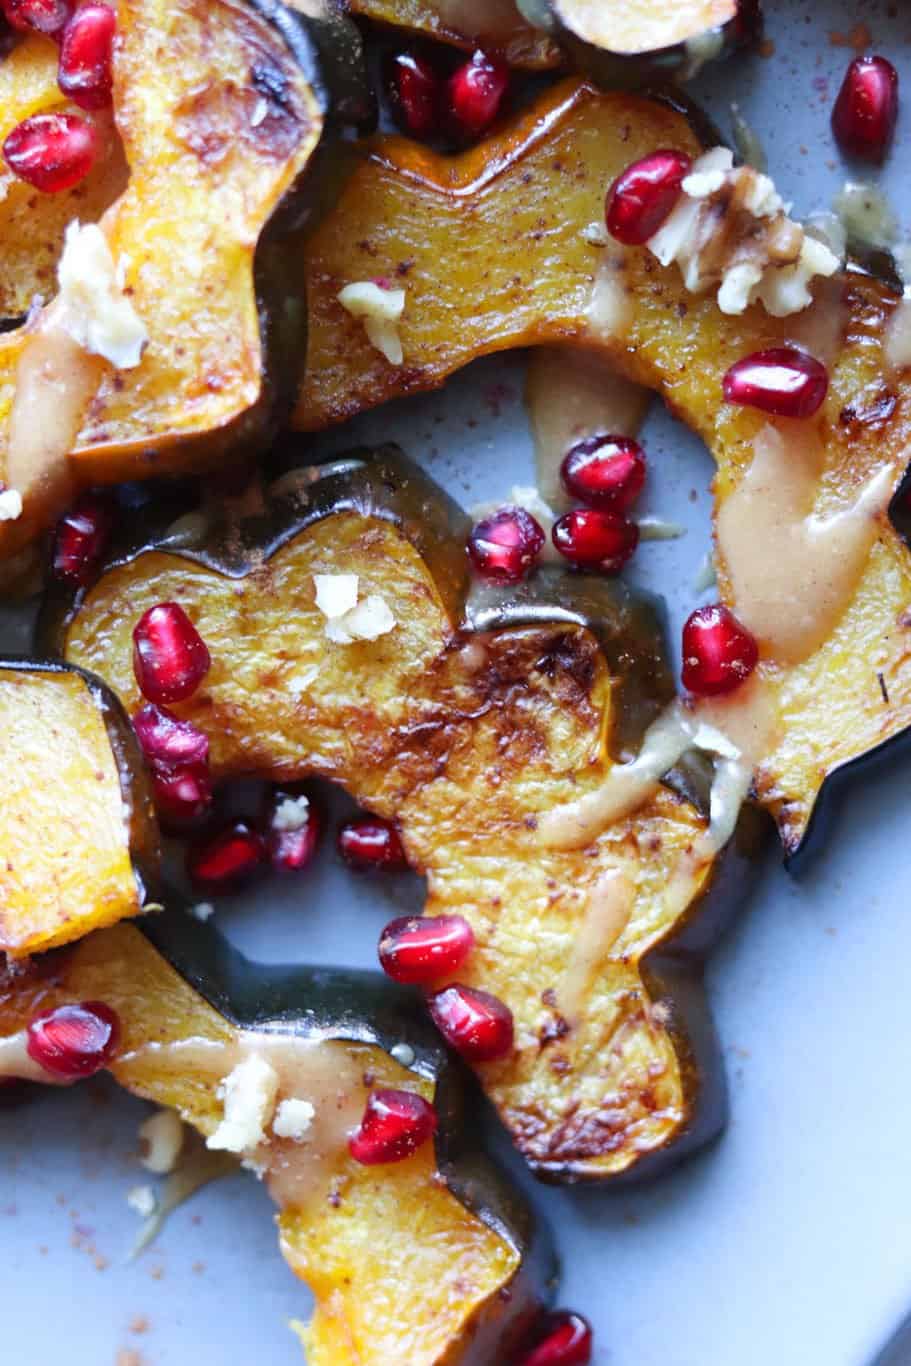 Sliced and roasted maple acorn squash with pomegranate seeds sprinkled on top.